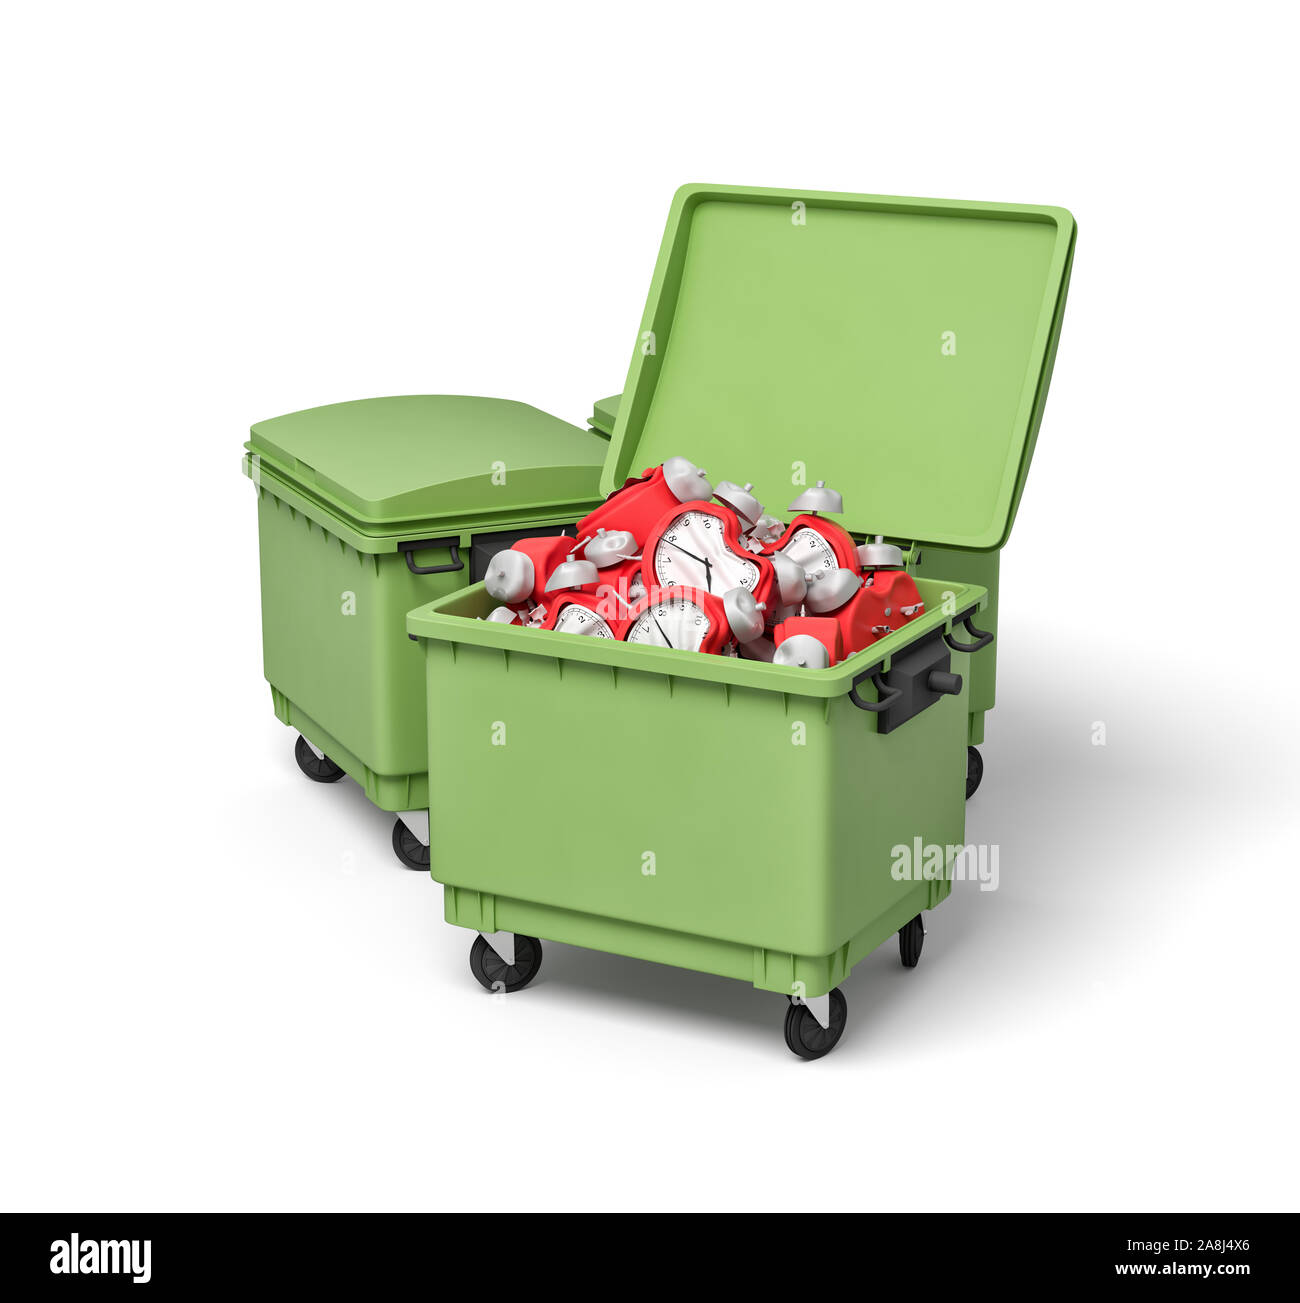 3d rendering of two green trash cans, front can open and full of broken and bent red alarm clocks. Stock Photo